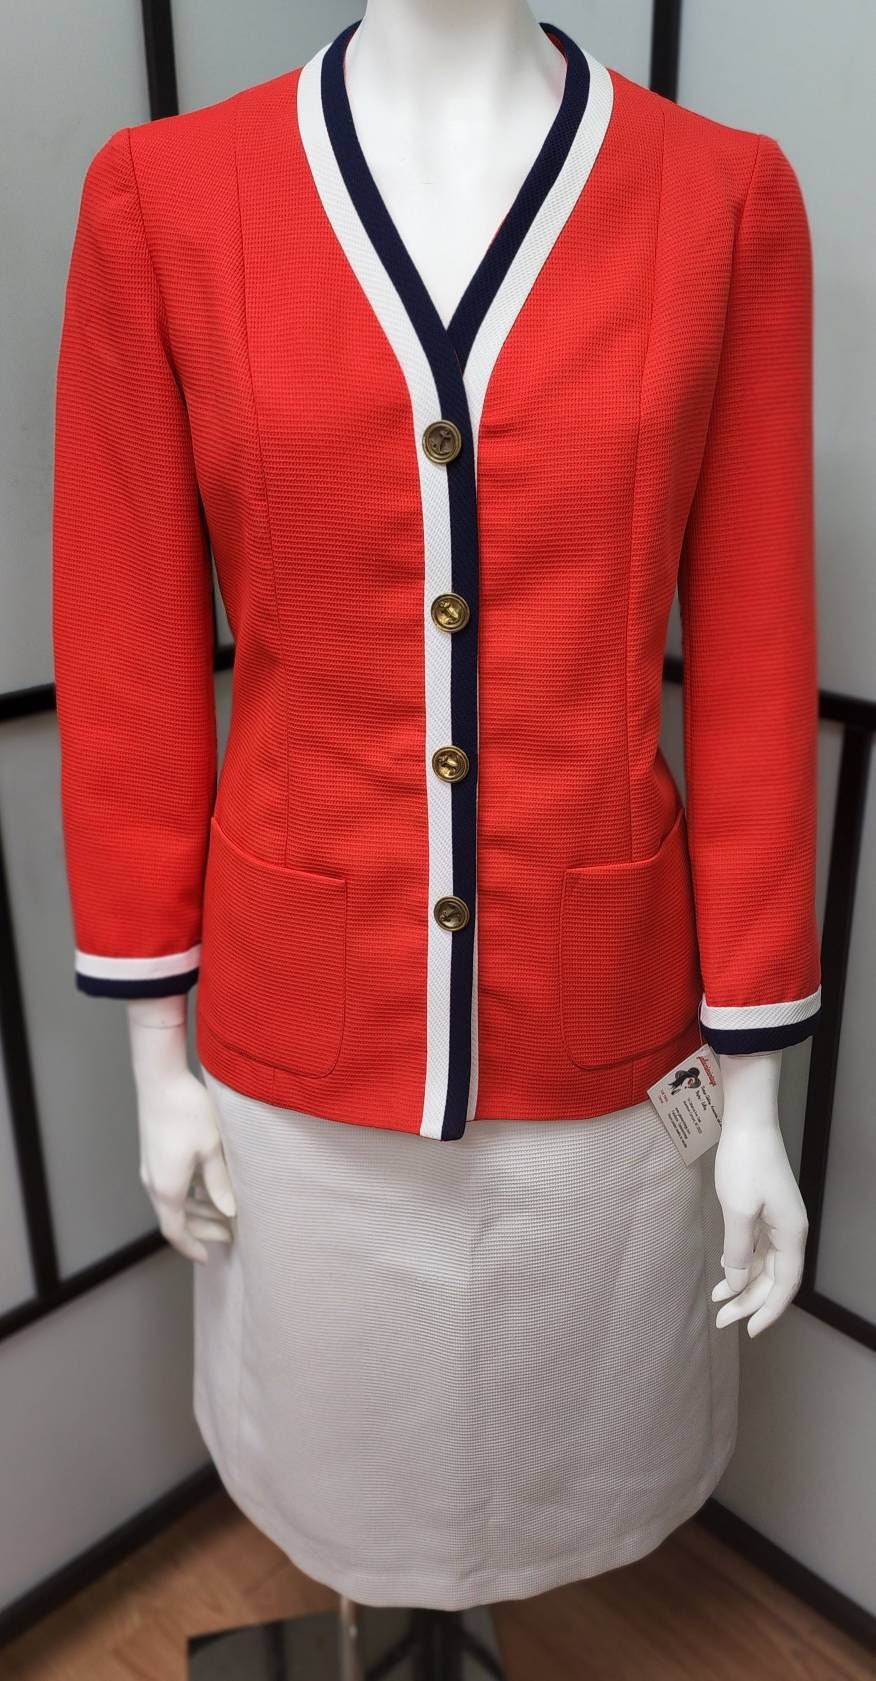 Vintage Skirt Suit 1960s Bright Orangey Red Blue White Classic Nautical Suit Gold Anchor Buttons Abercrombie & Fitch Boho S